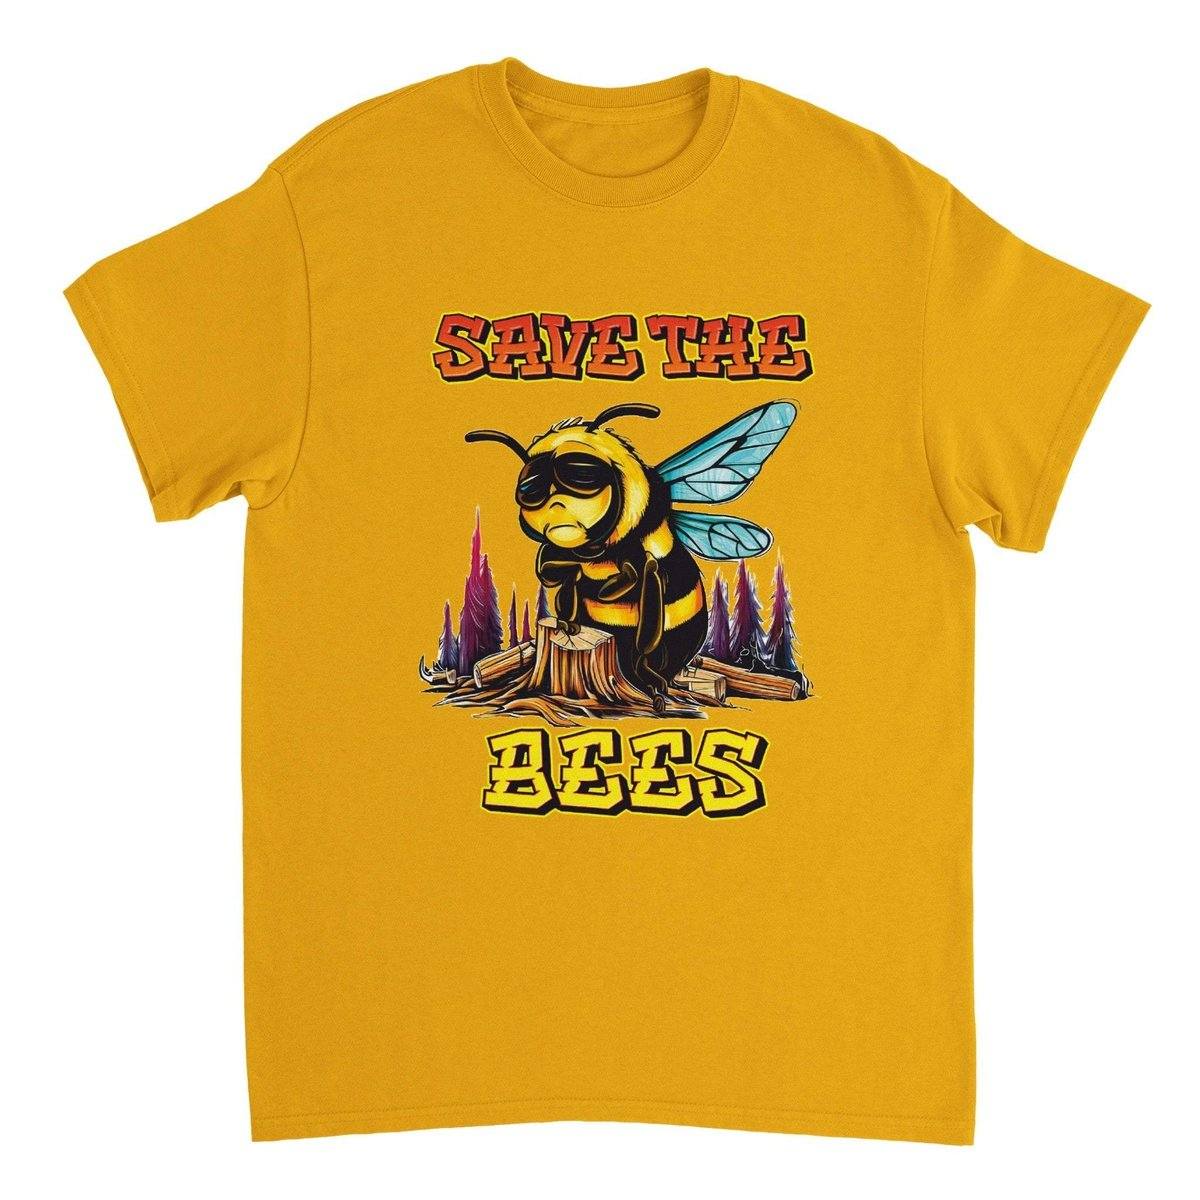 Save The Bees Tshirt - Crying Bee - Unisex Crewneck T-shirt Australia Online Color Gold / S